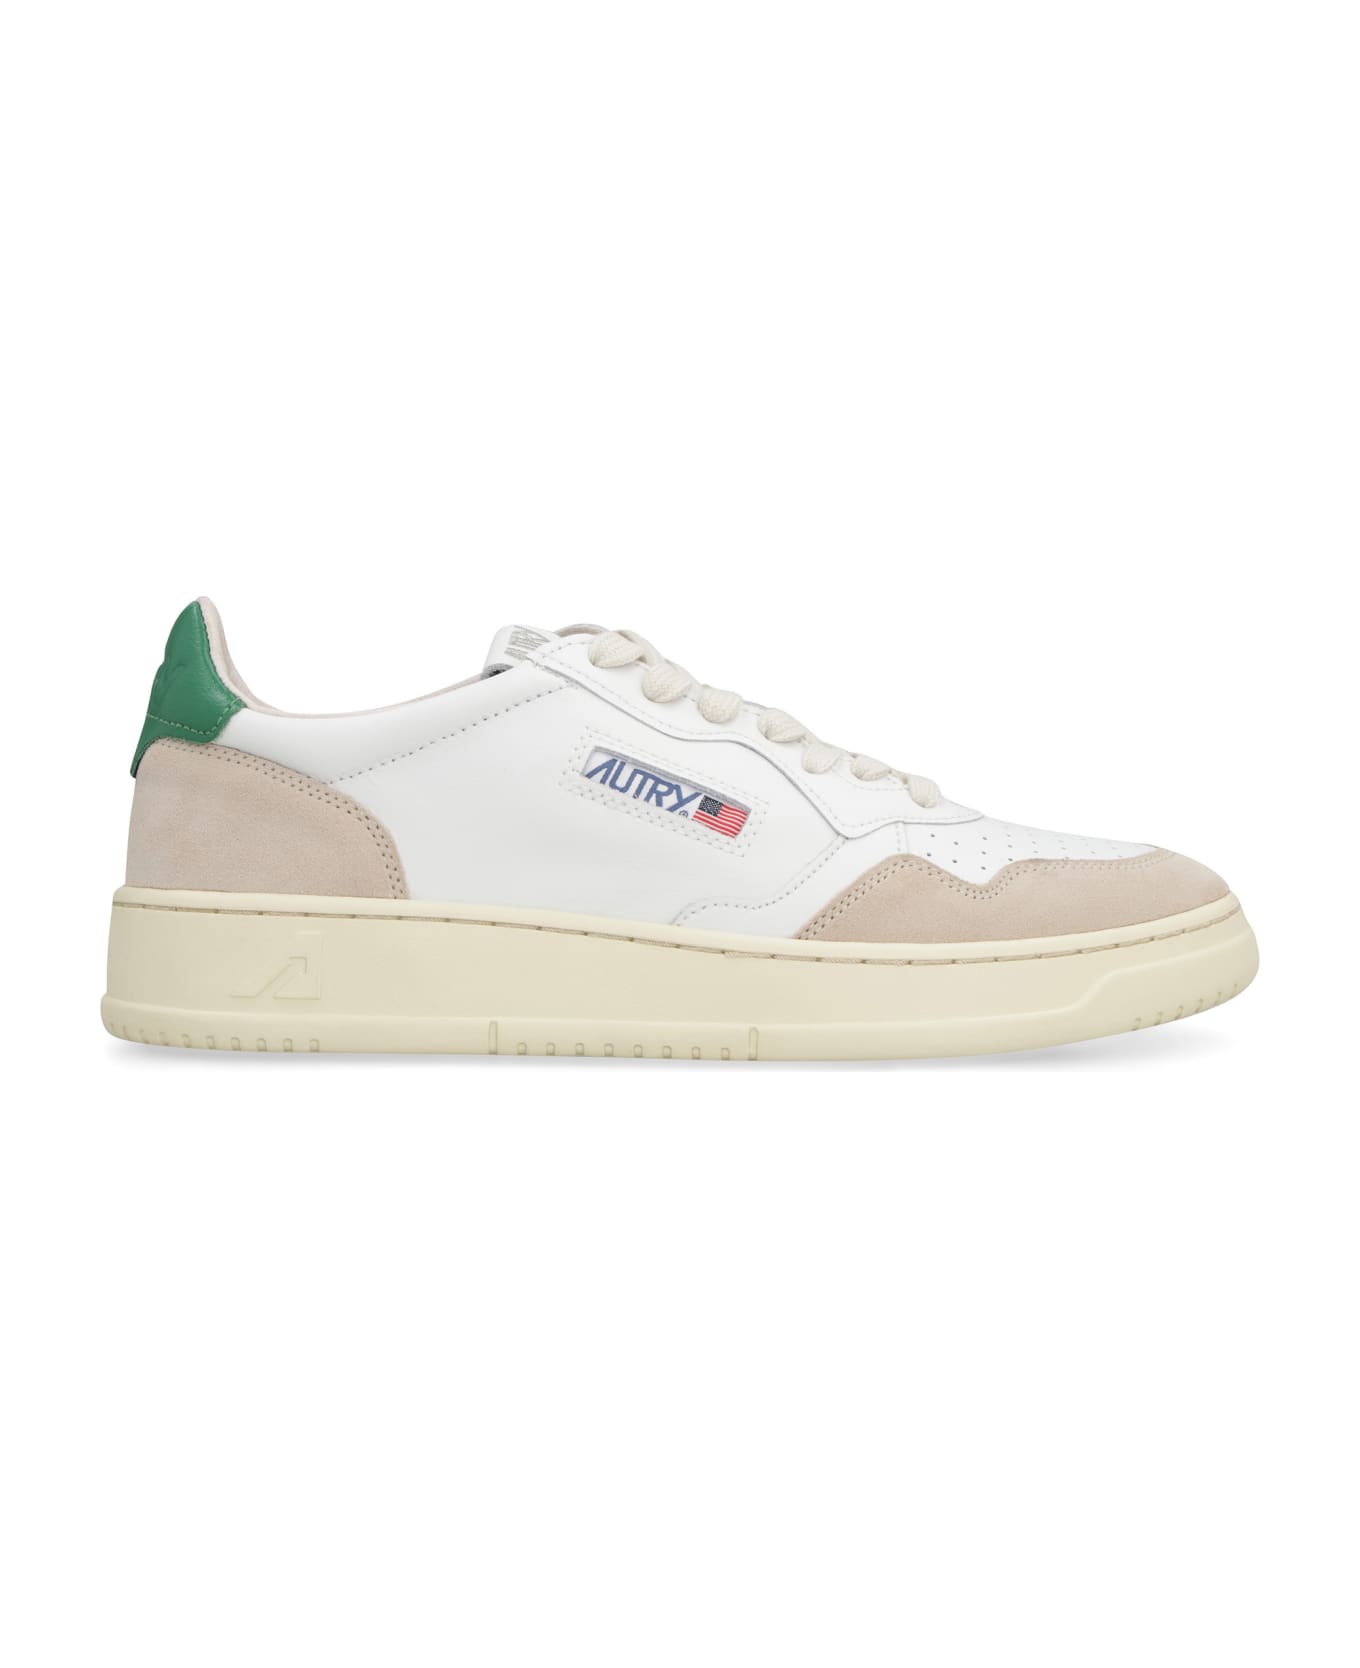 Autry Medalist Leather Low-top Sneakers - Green